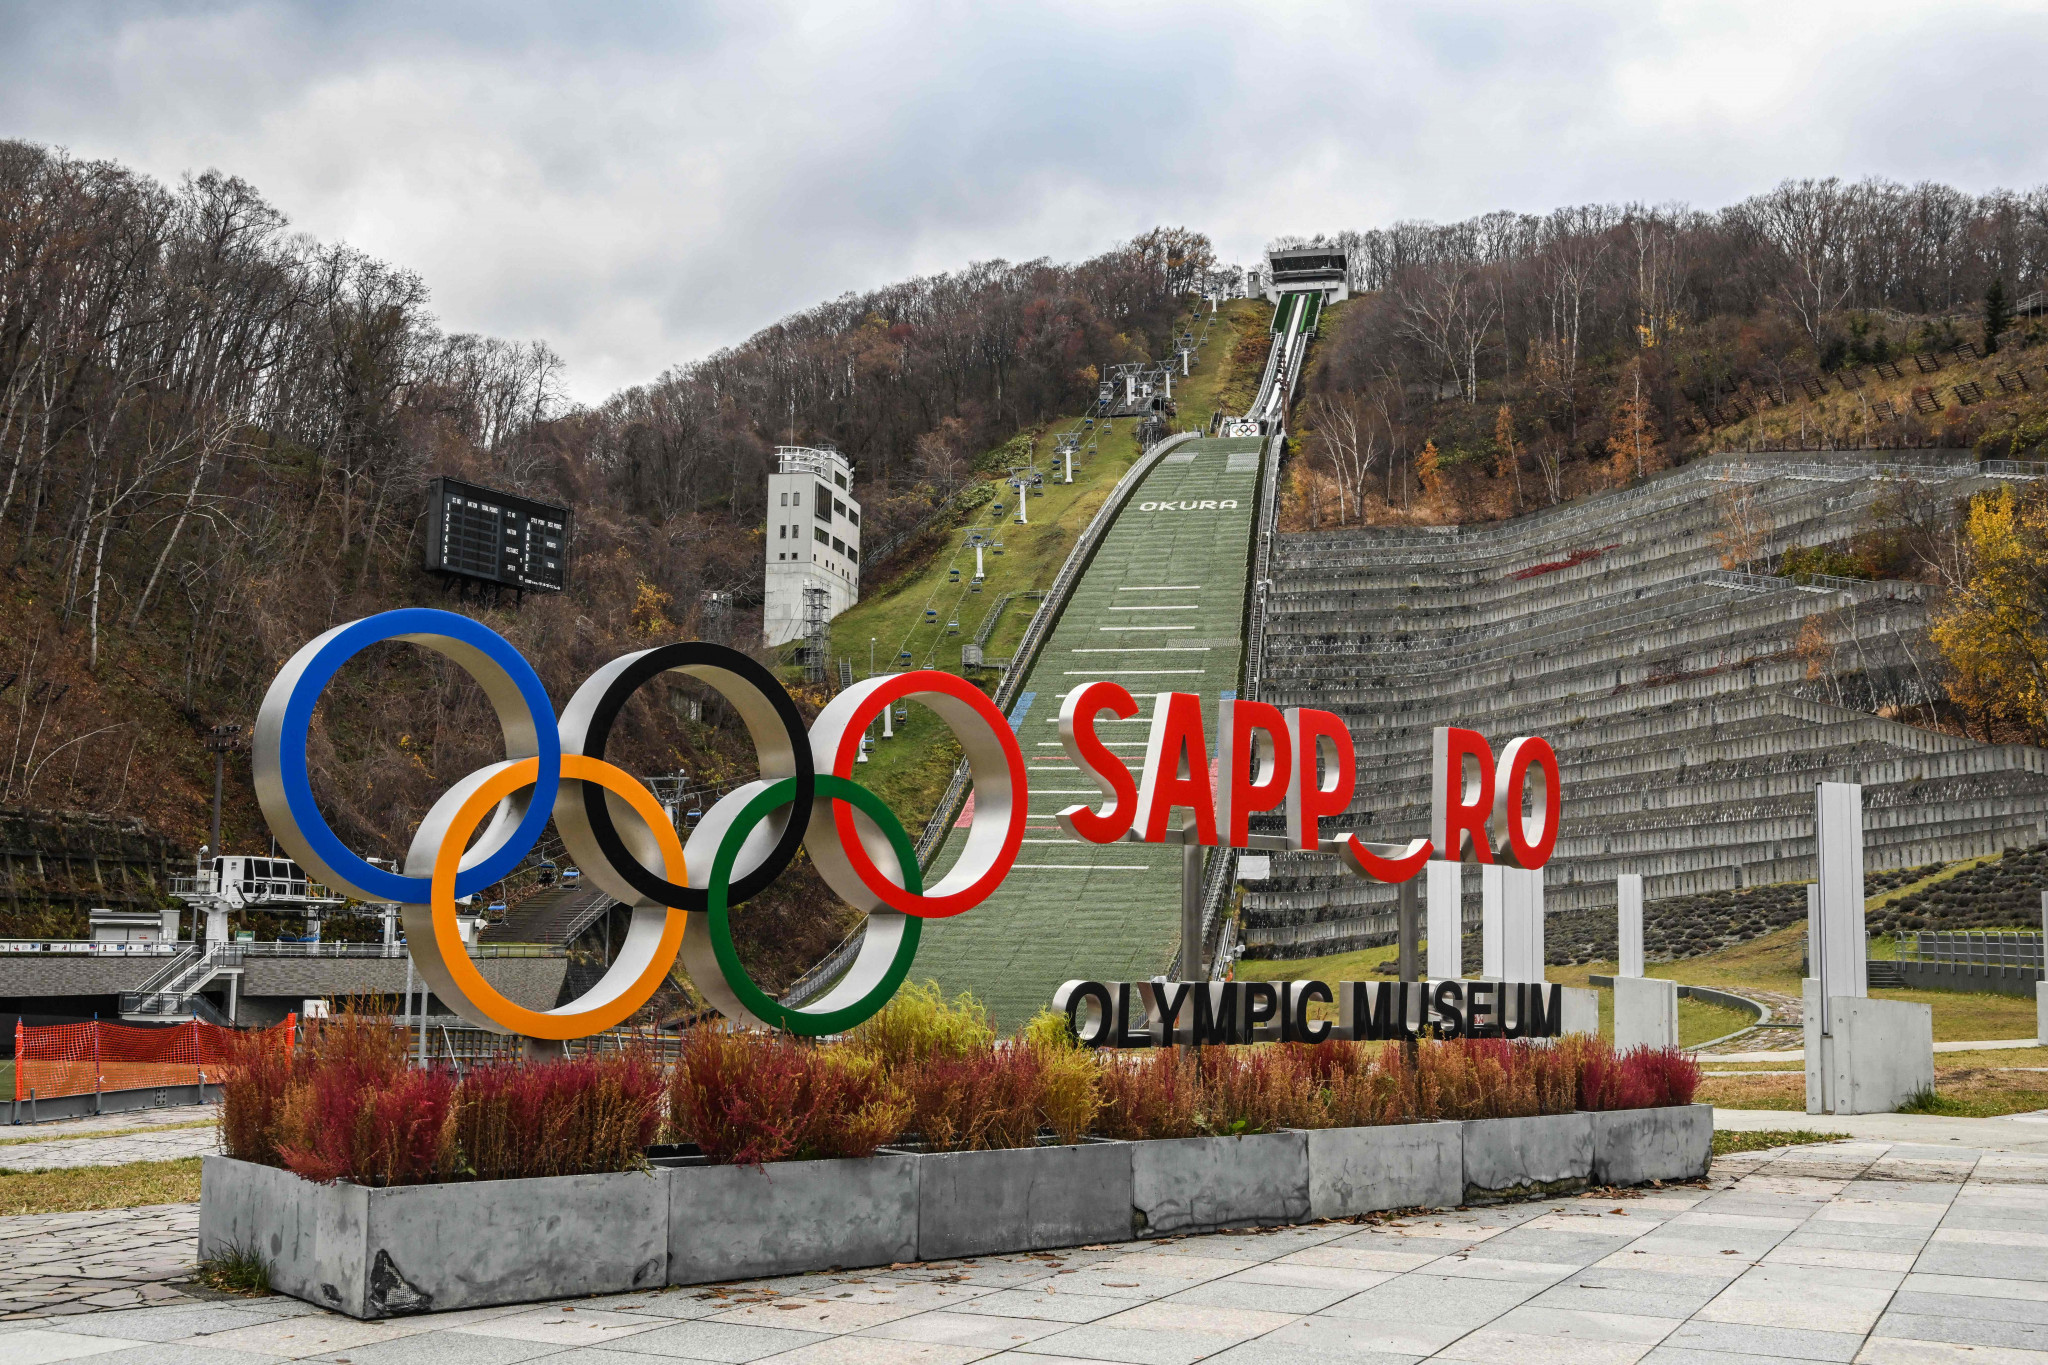 Sapporo's hopes of staging the Winter Olympics for the second time in 2030 have been hampered by the Tokyo 2020 bribery scandal ©Getty Images